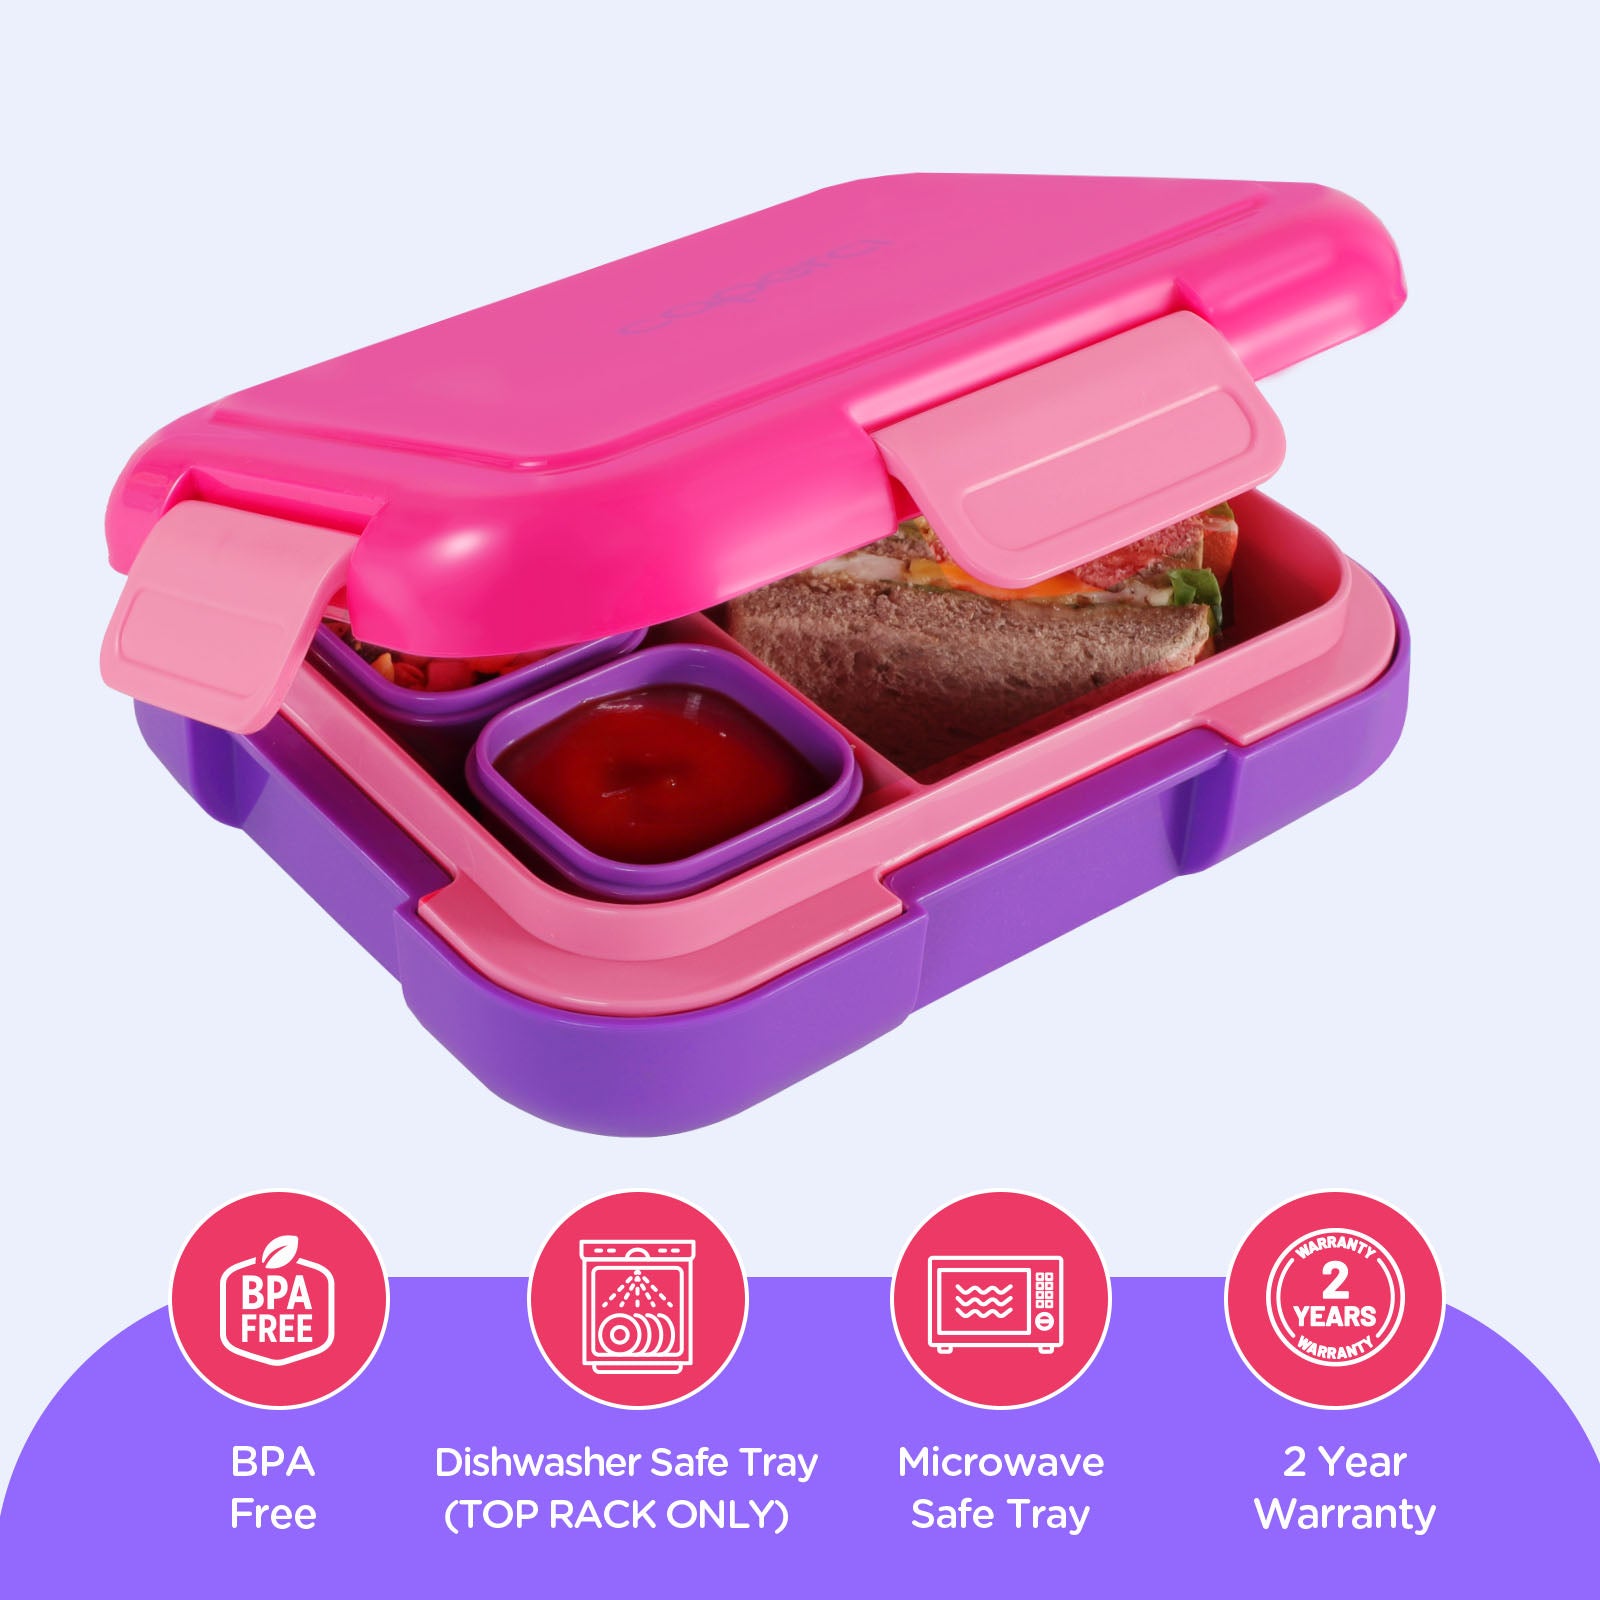 Caperci Versatile Kids Bento Lunch Box - Leakproof 6-Compartment Children's  Lunch Container with Rem…See more Caperci Versatile Kids Bento Lunch Box 